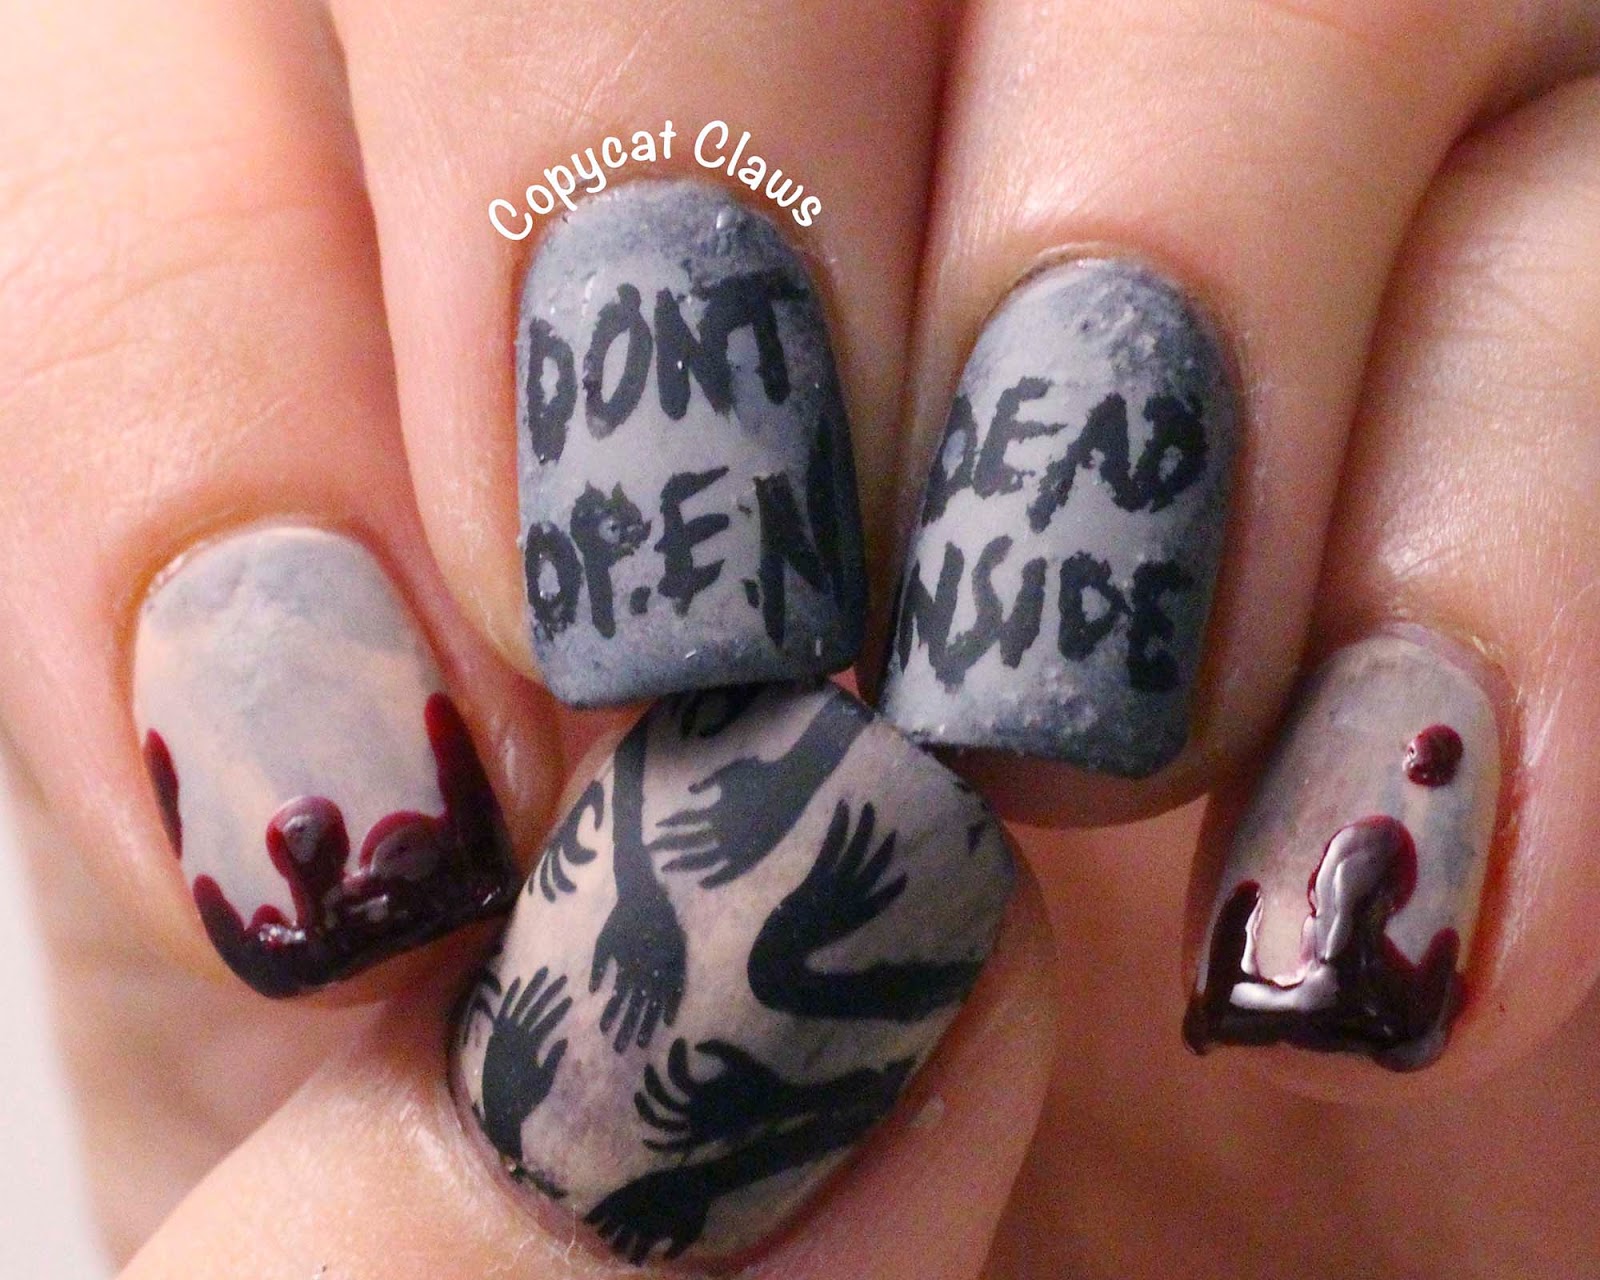 1. "The Walking Dead" Inspired Nail Art Designs - wide 3